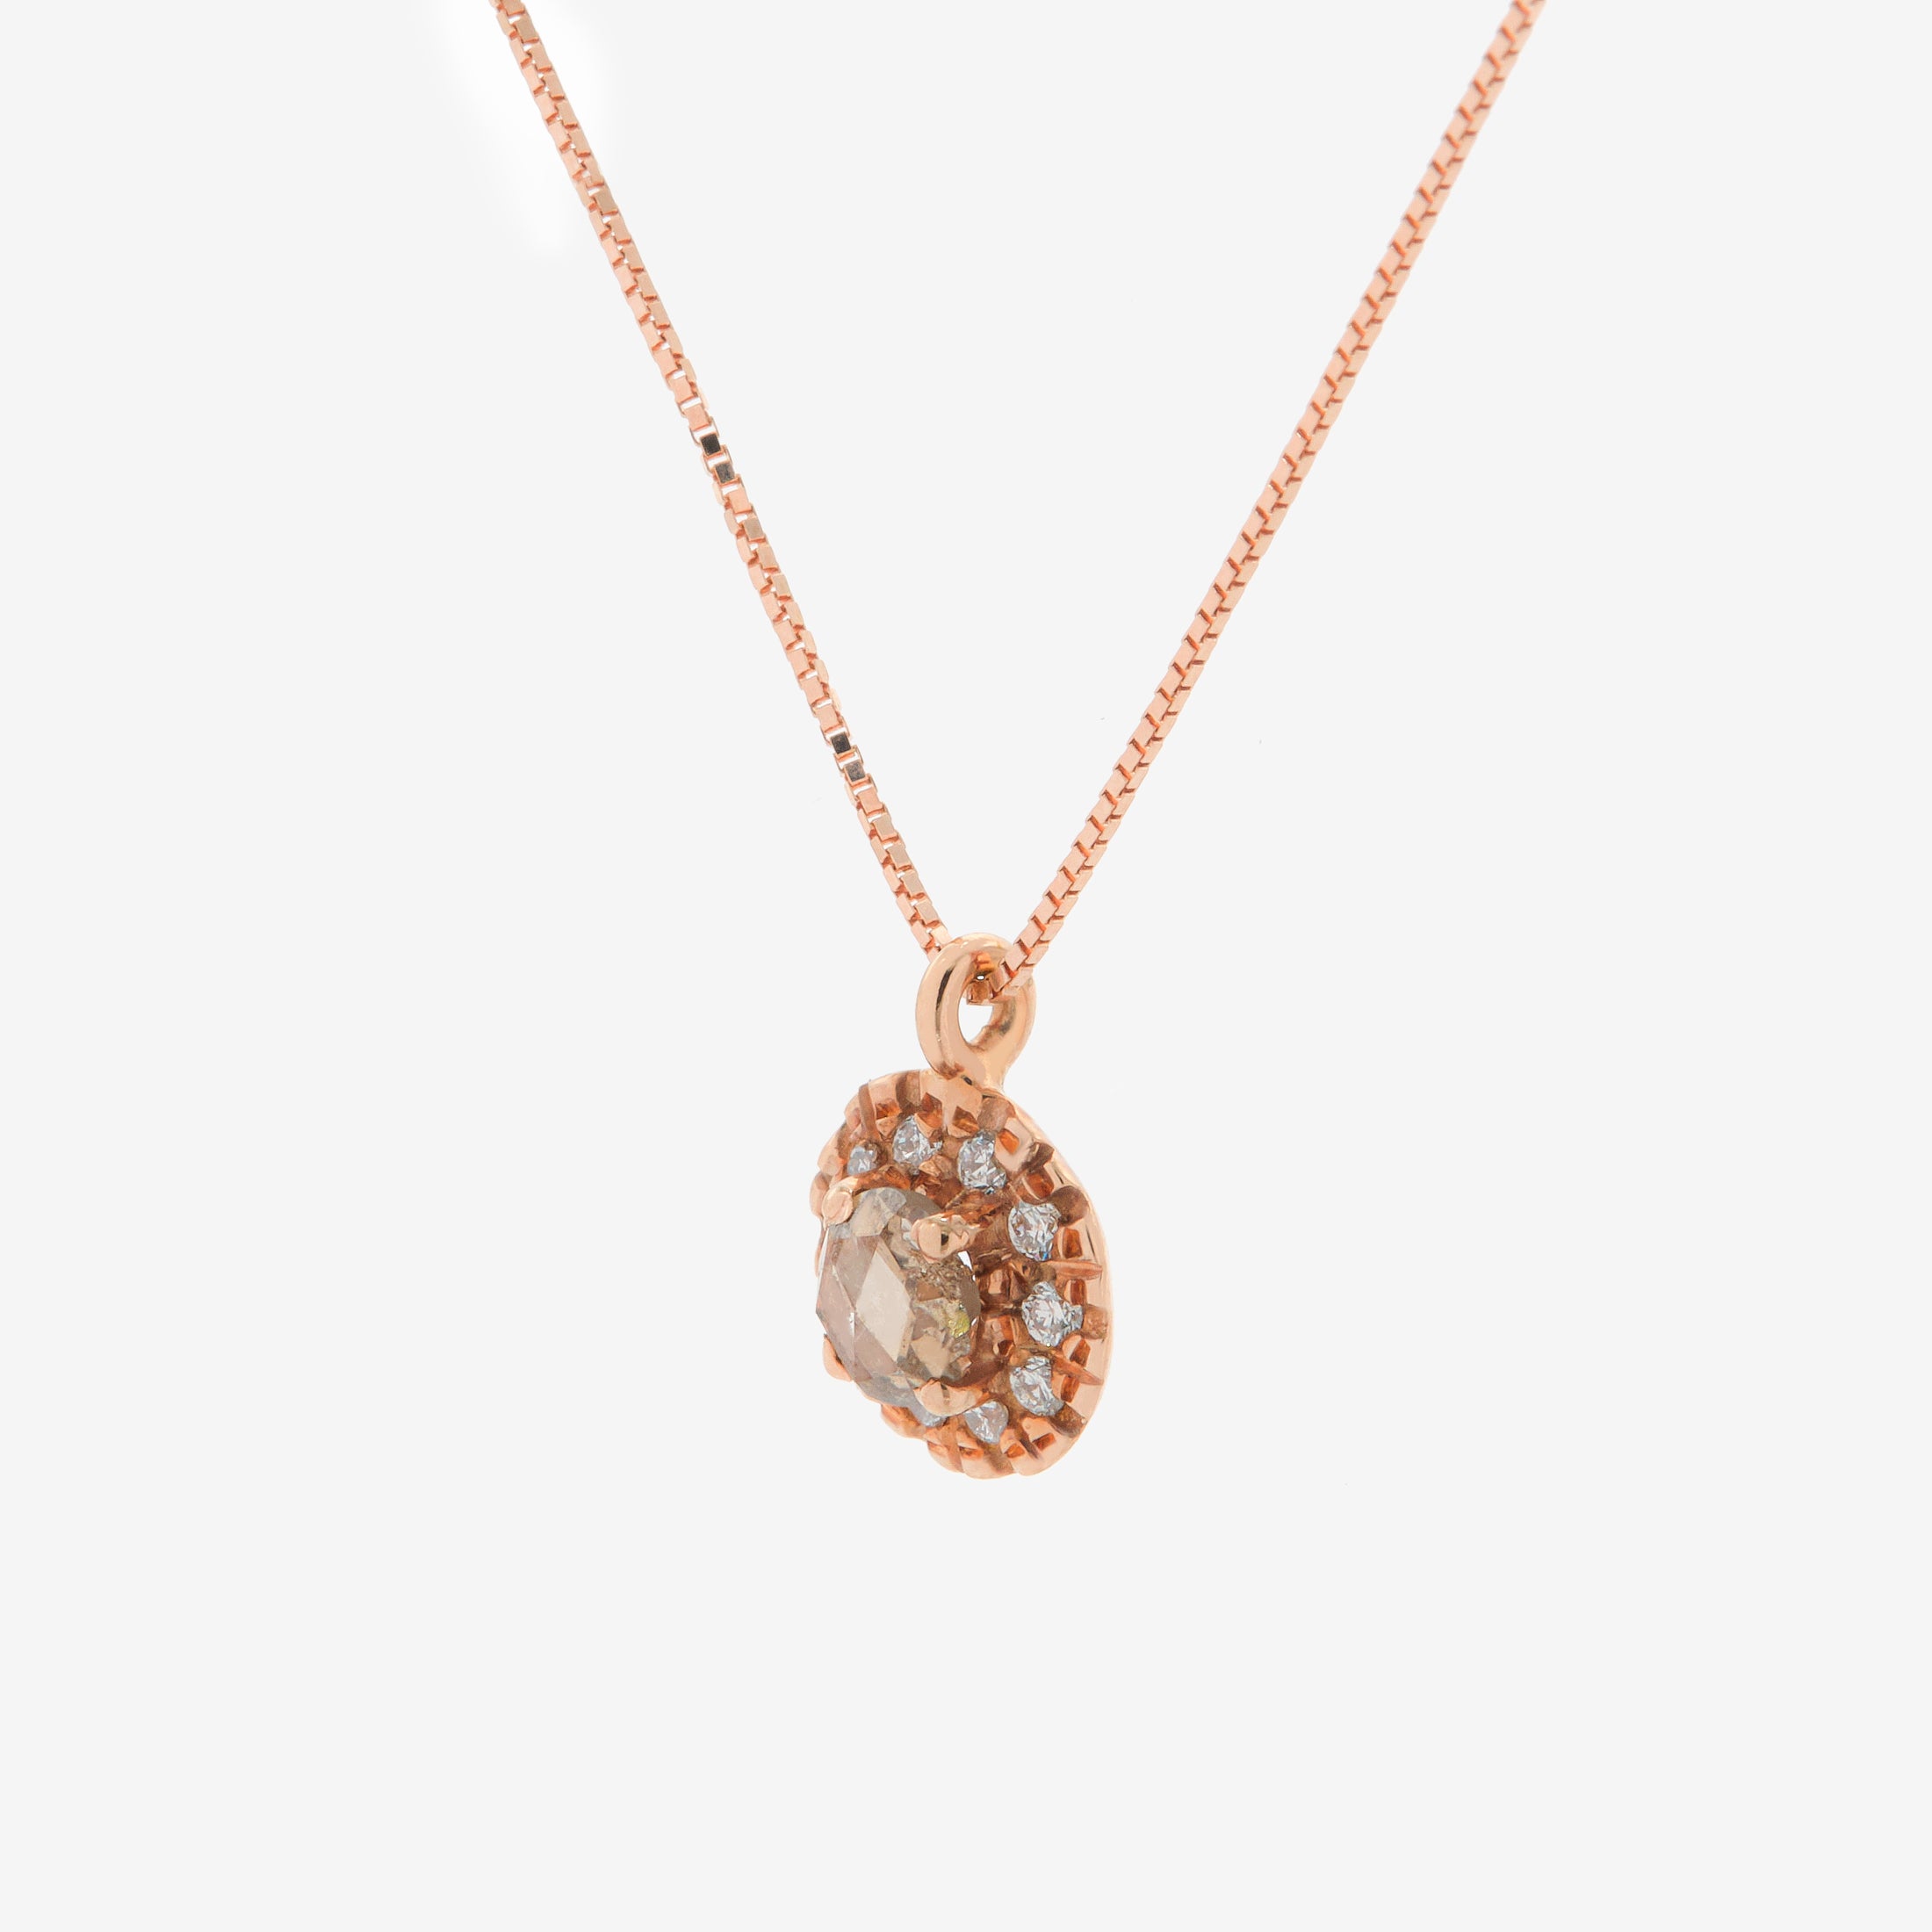 Rose gold necklace with brown diamond